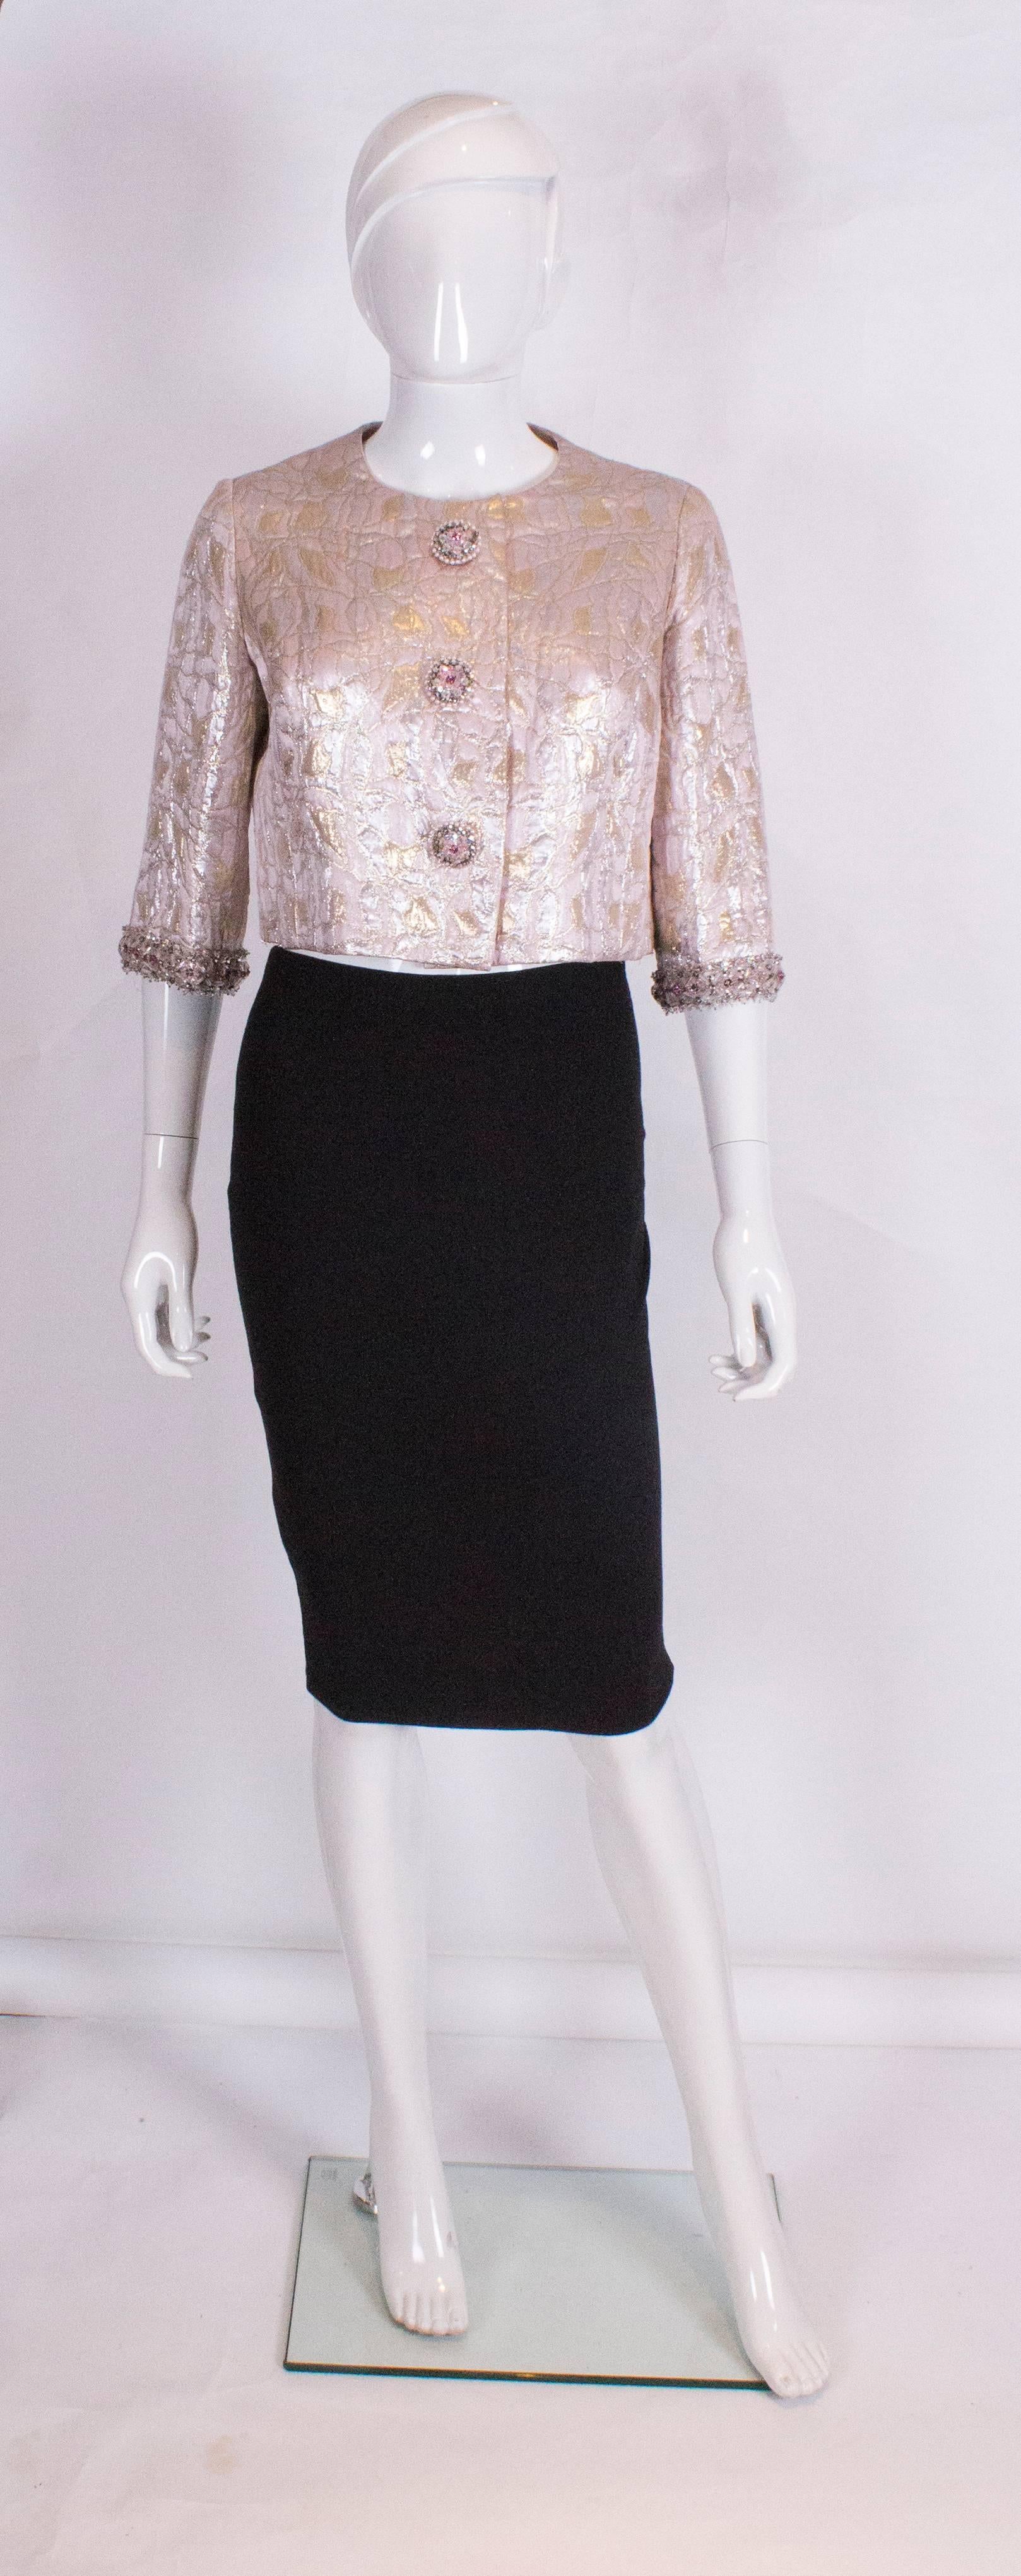 A charming and chic evening jacket by Neymar Couture of 19 Berkeley Street, London W1. The jacket hangs beautifully ( has weights in the hem),has elbow length sleeves and wonderful trim along the cuffs, and fastens with three decorative buttons.